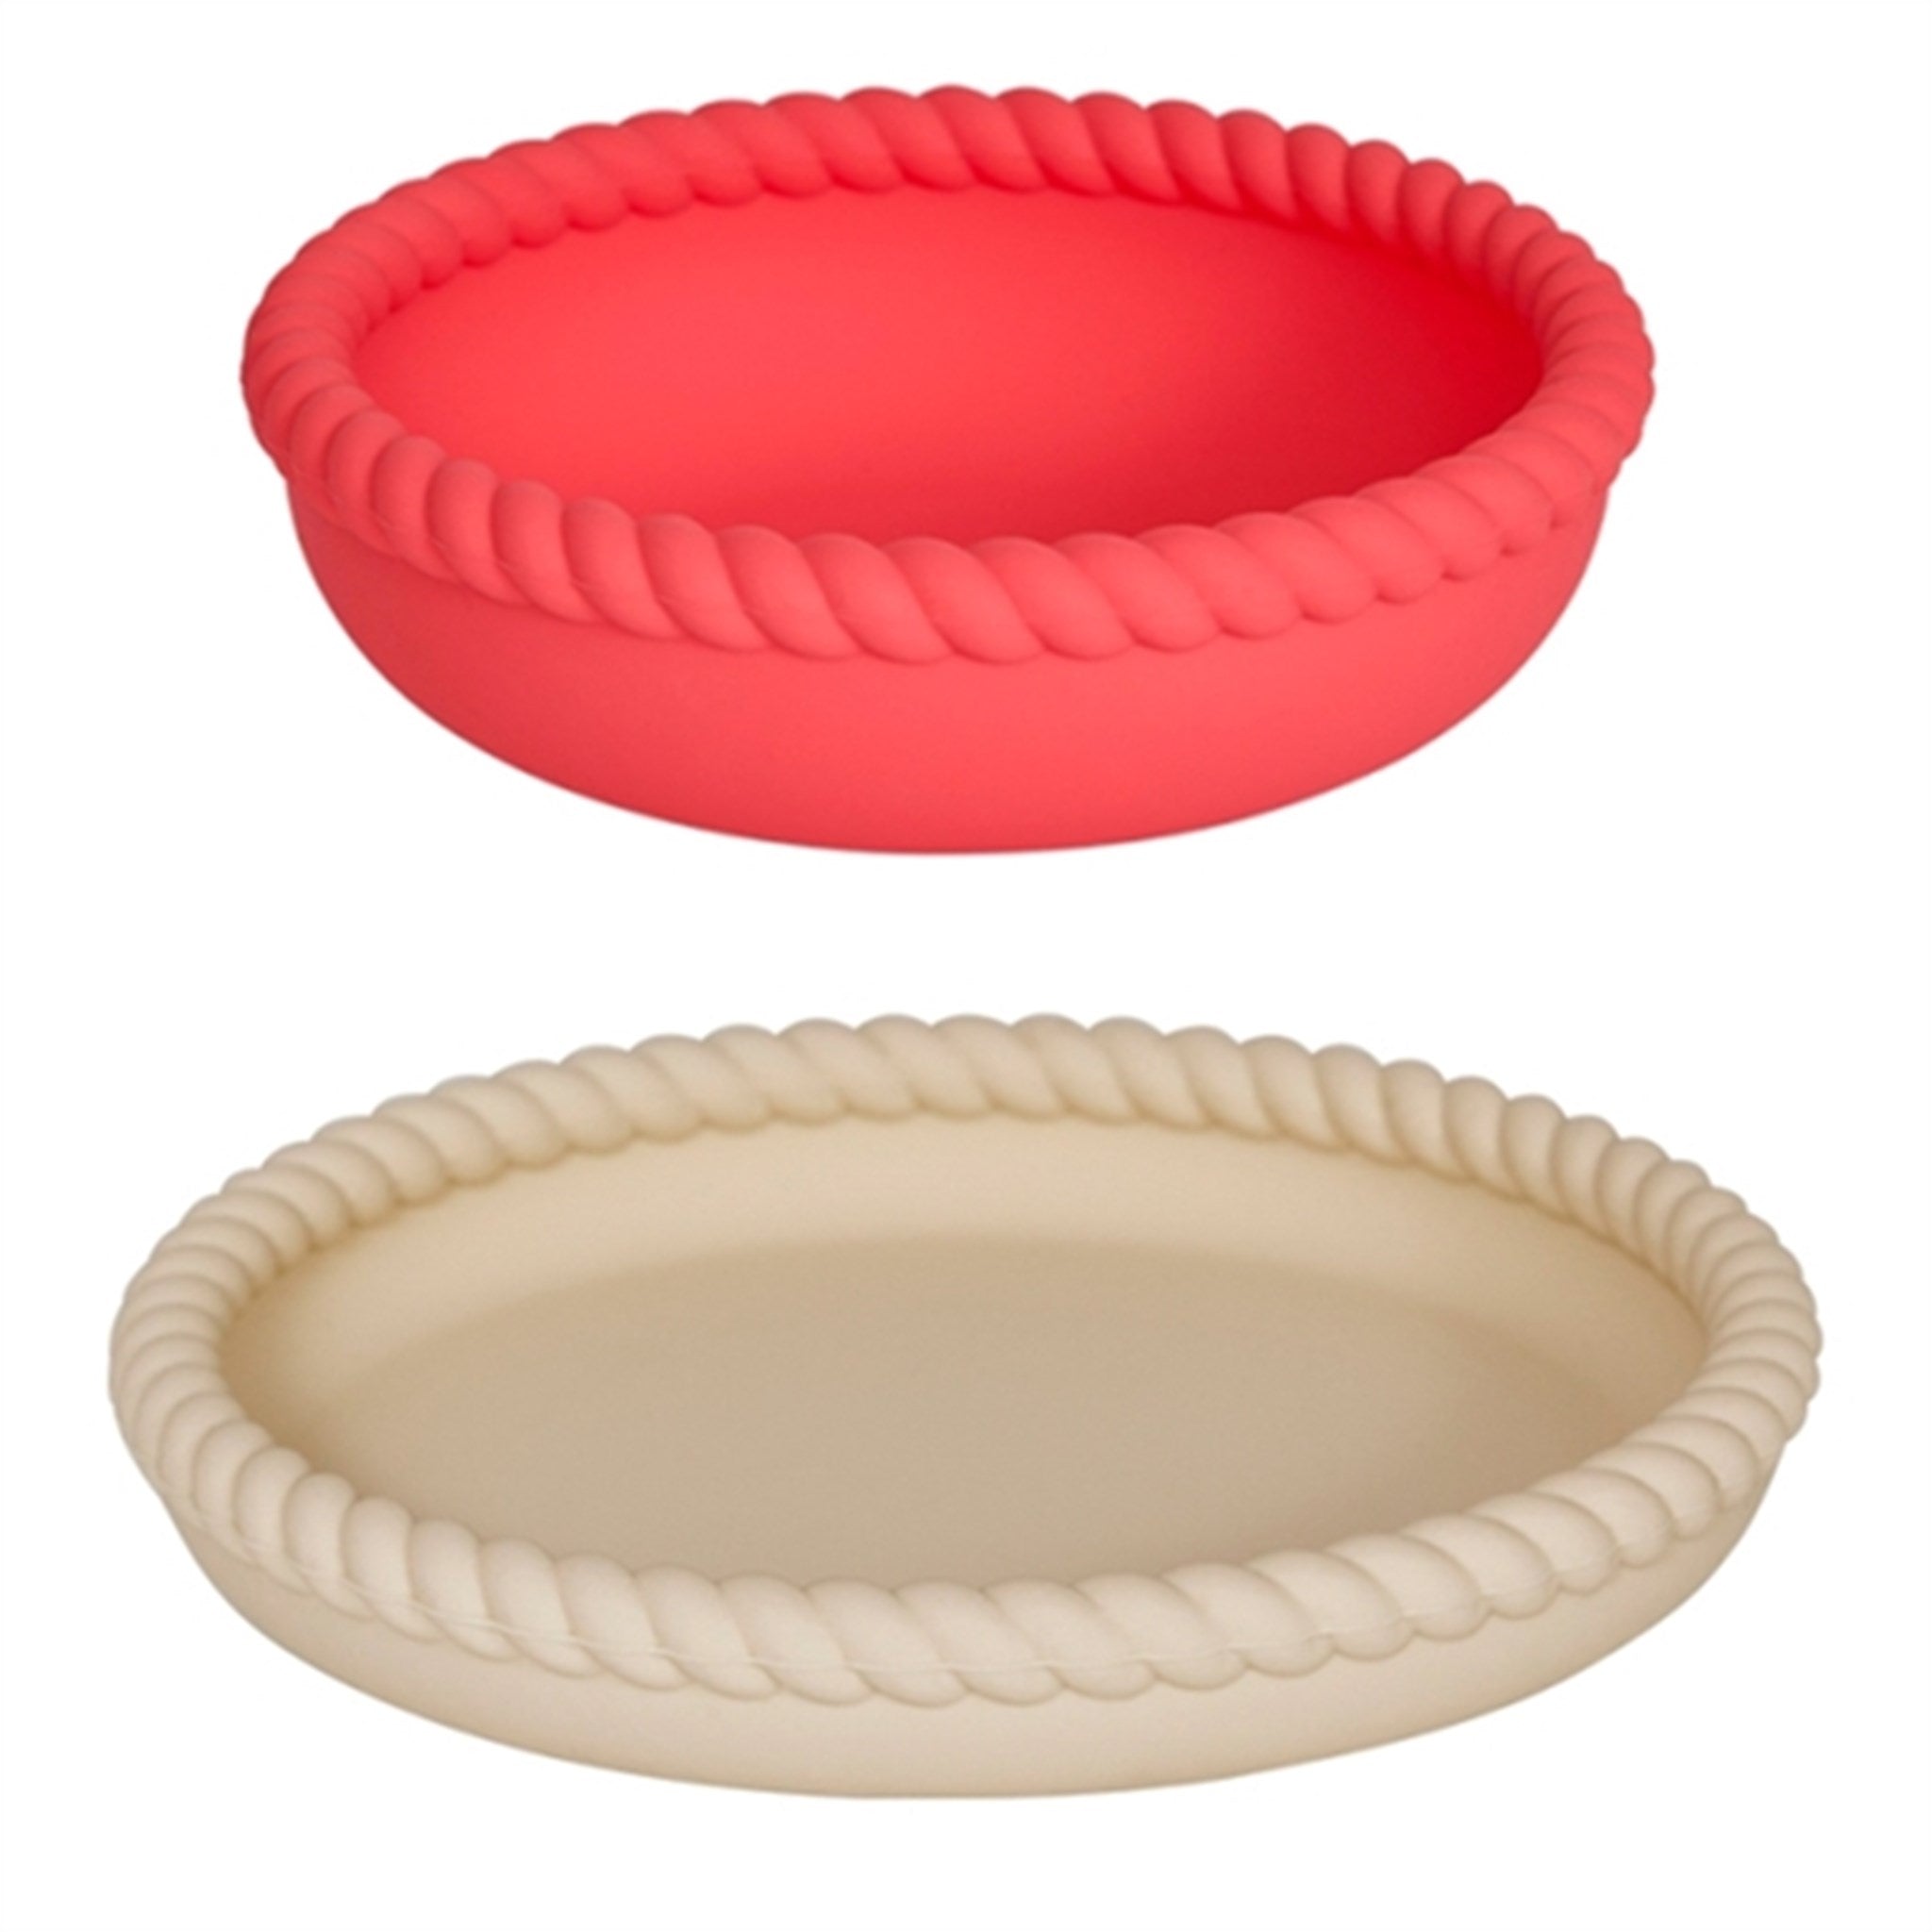 OYOY Mellow Bowl and Plate Vanilla/Cherry Red